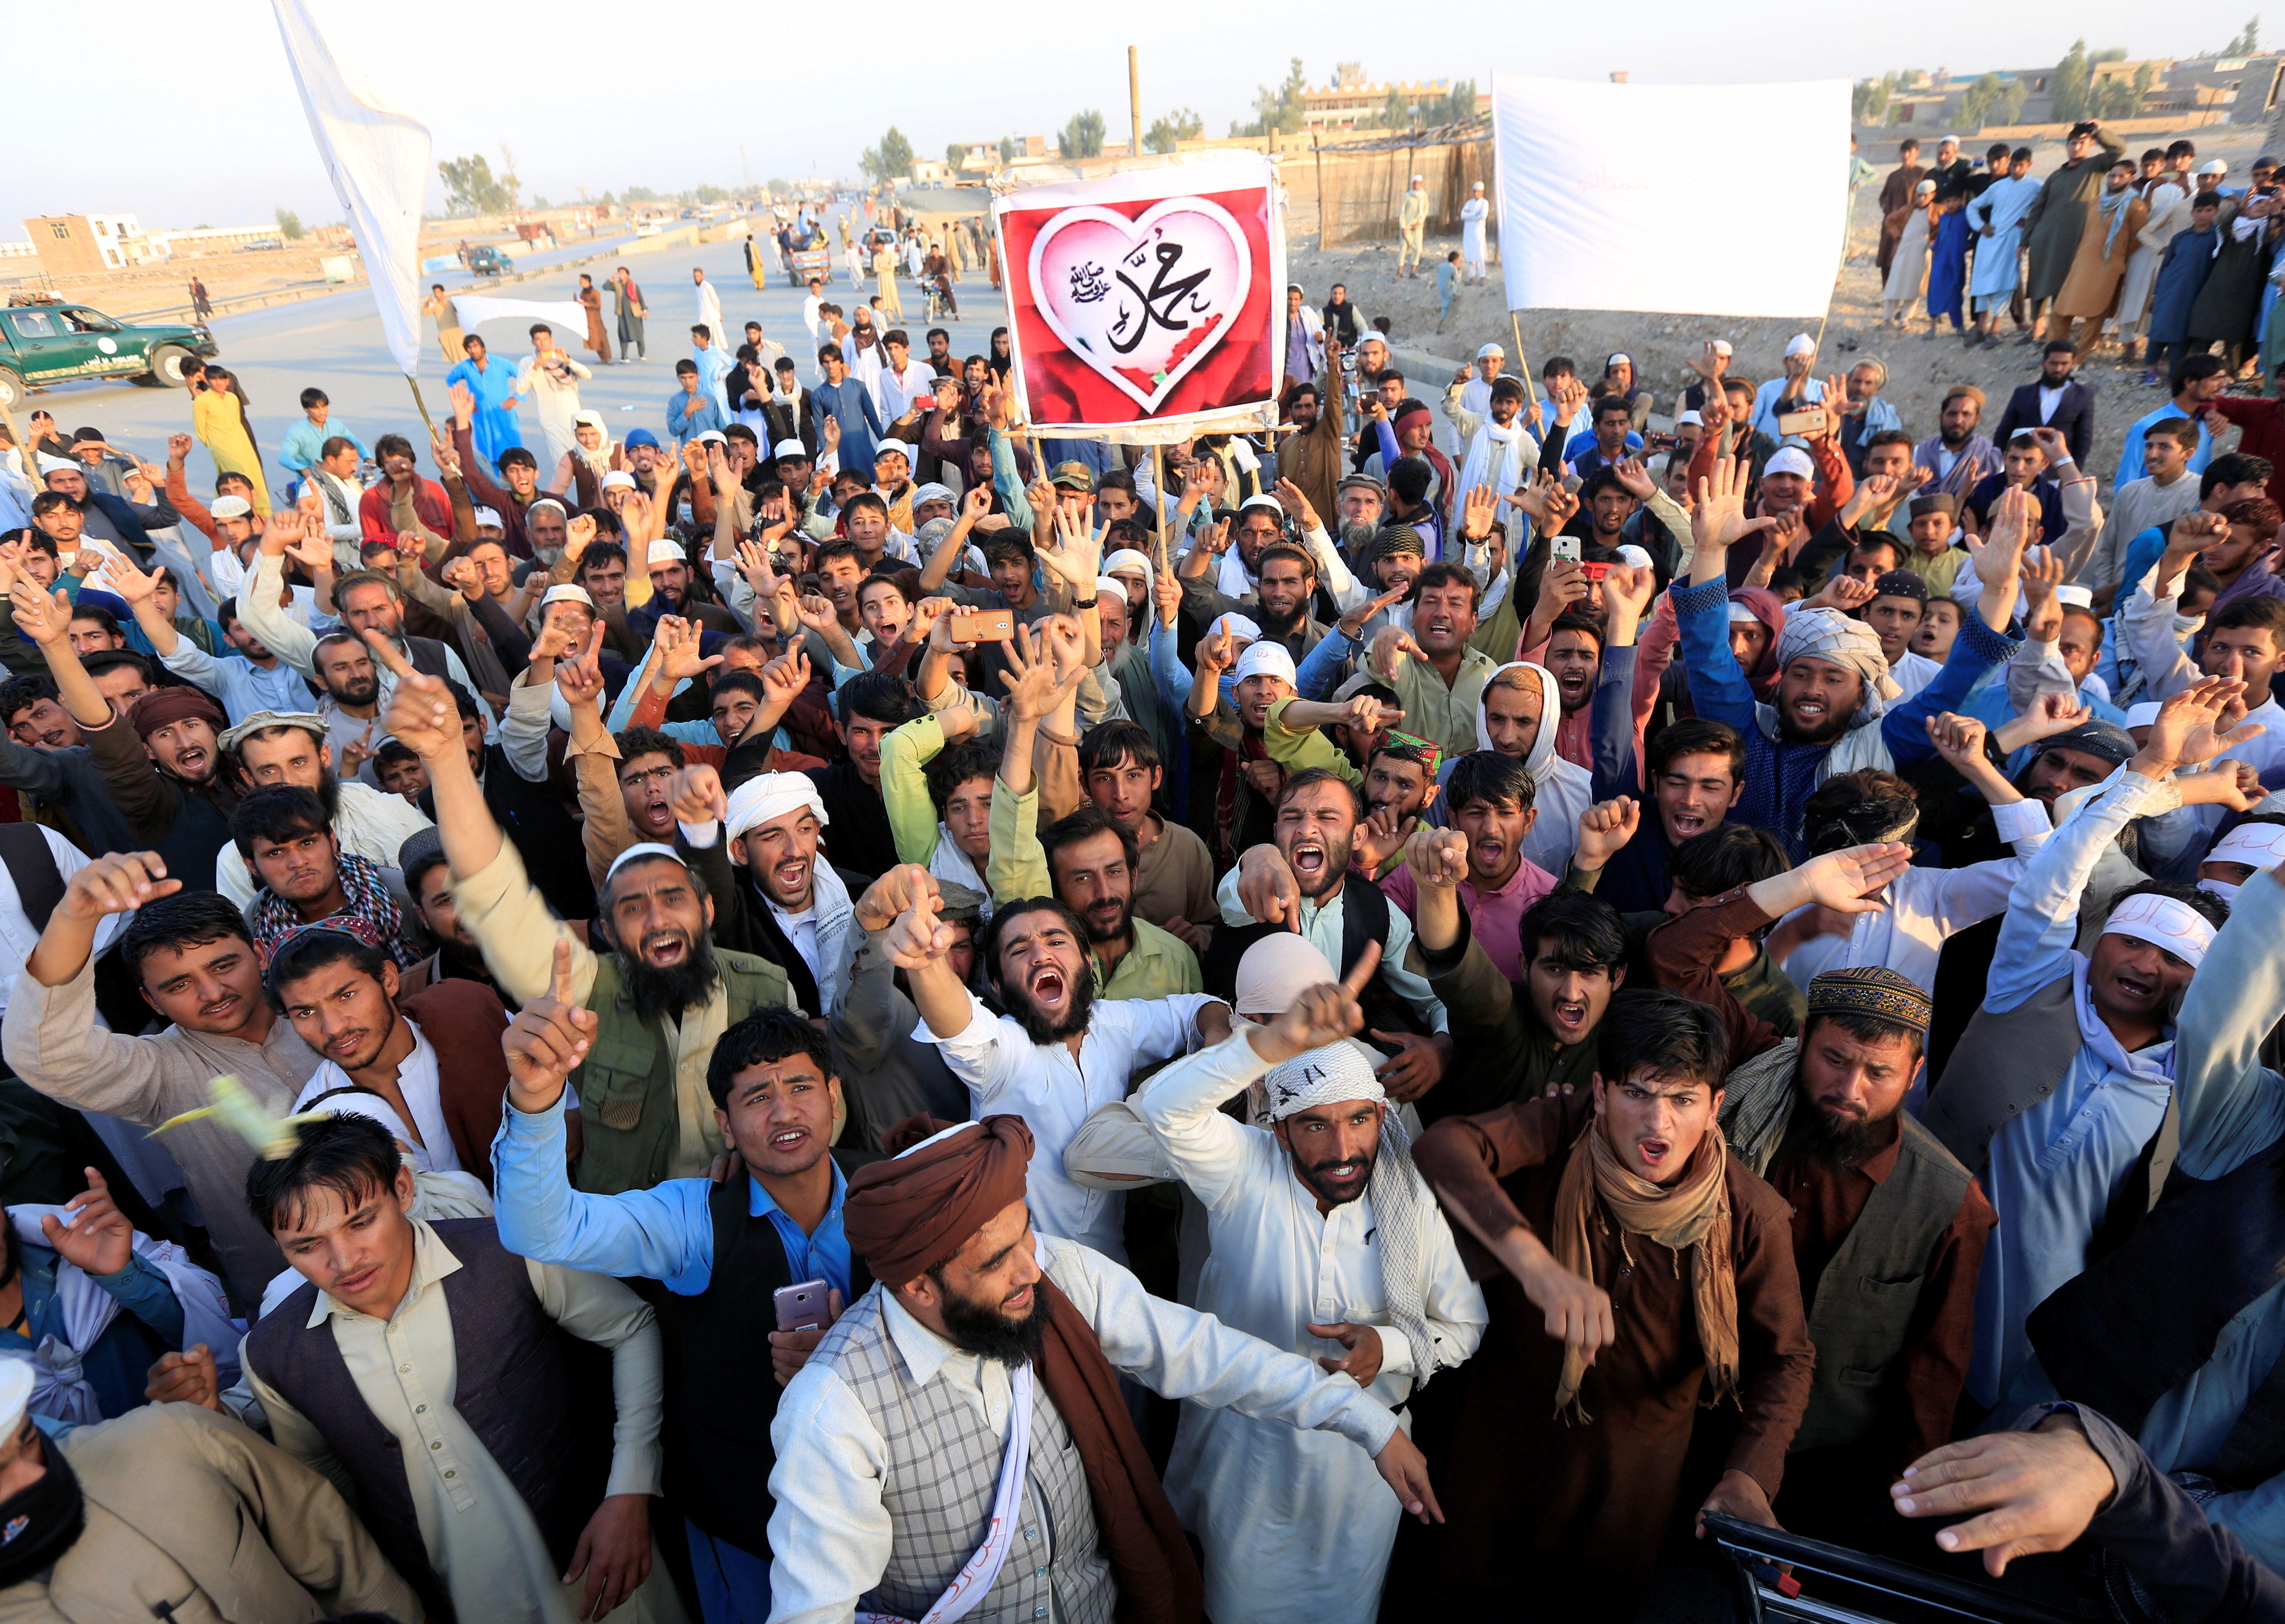 Afghans chant slogans during a protest against the French president Emmanuel Macron comments on the Prophet Mohammad, on the outskirts of Jalalabad in Nangerhar province, Afghanistan October 30, 2020. REUTERS/Parwiz